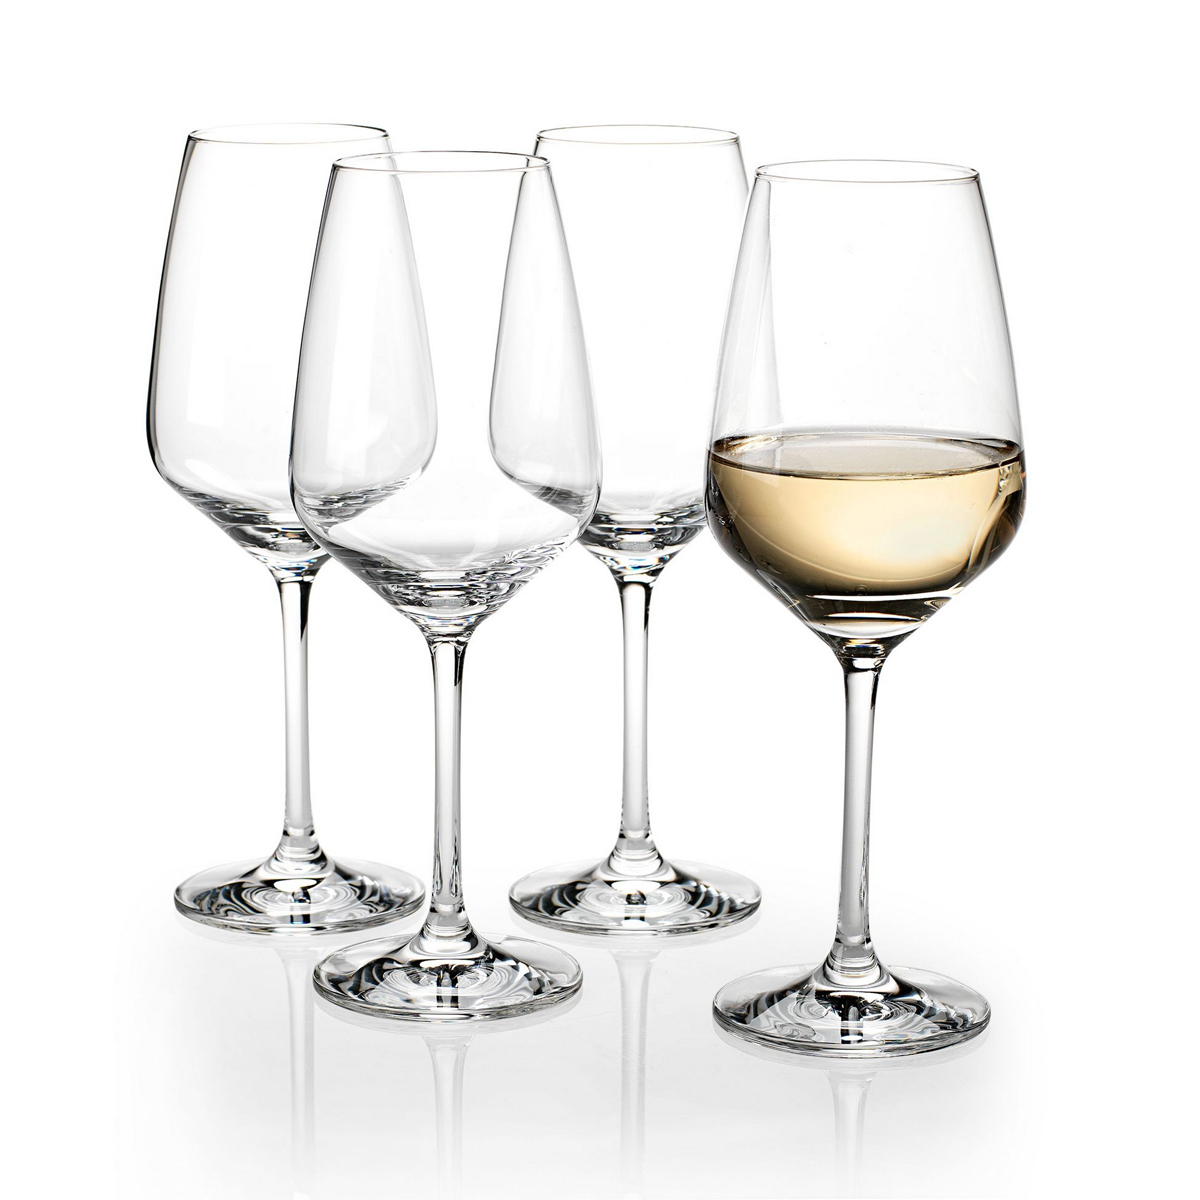 Villeroy and Boch Voice Basic White Wine Glasses, Set of 4